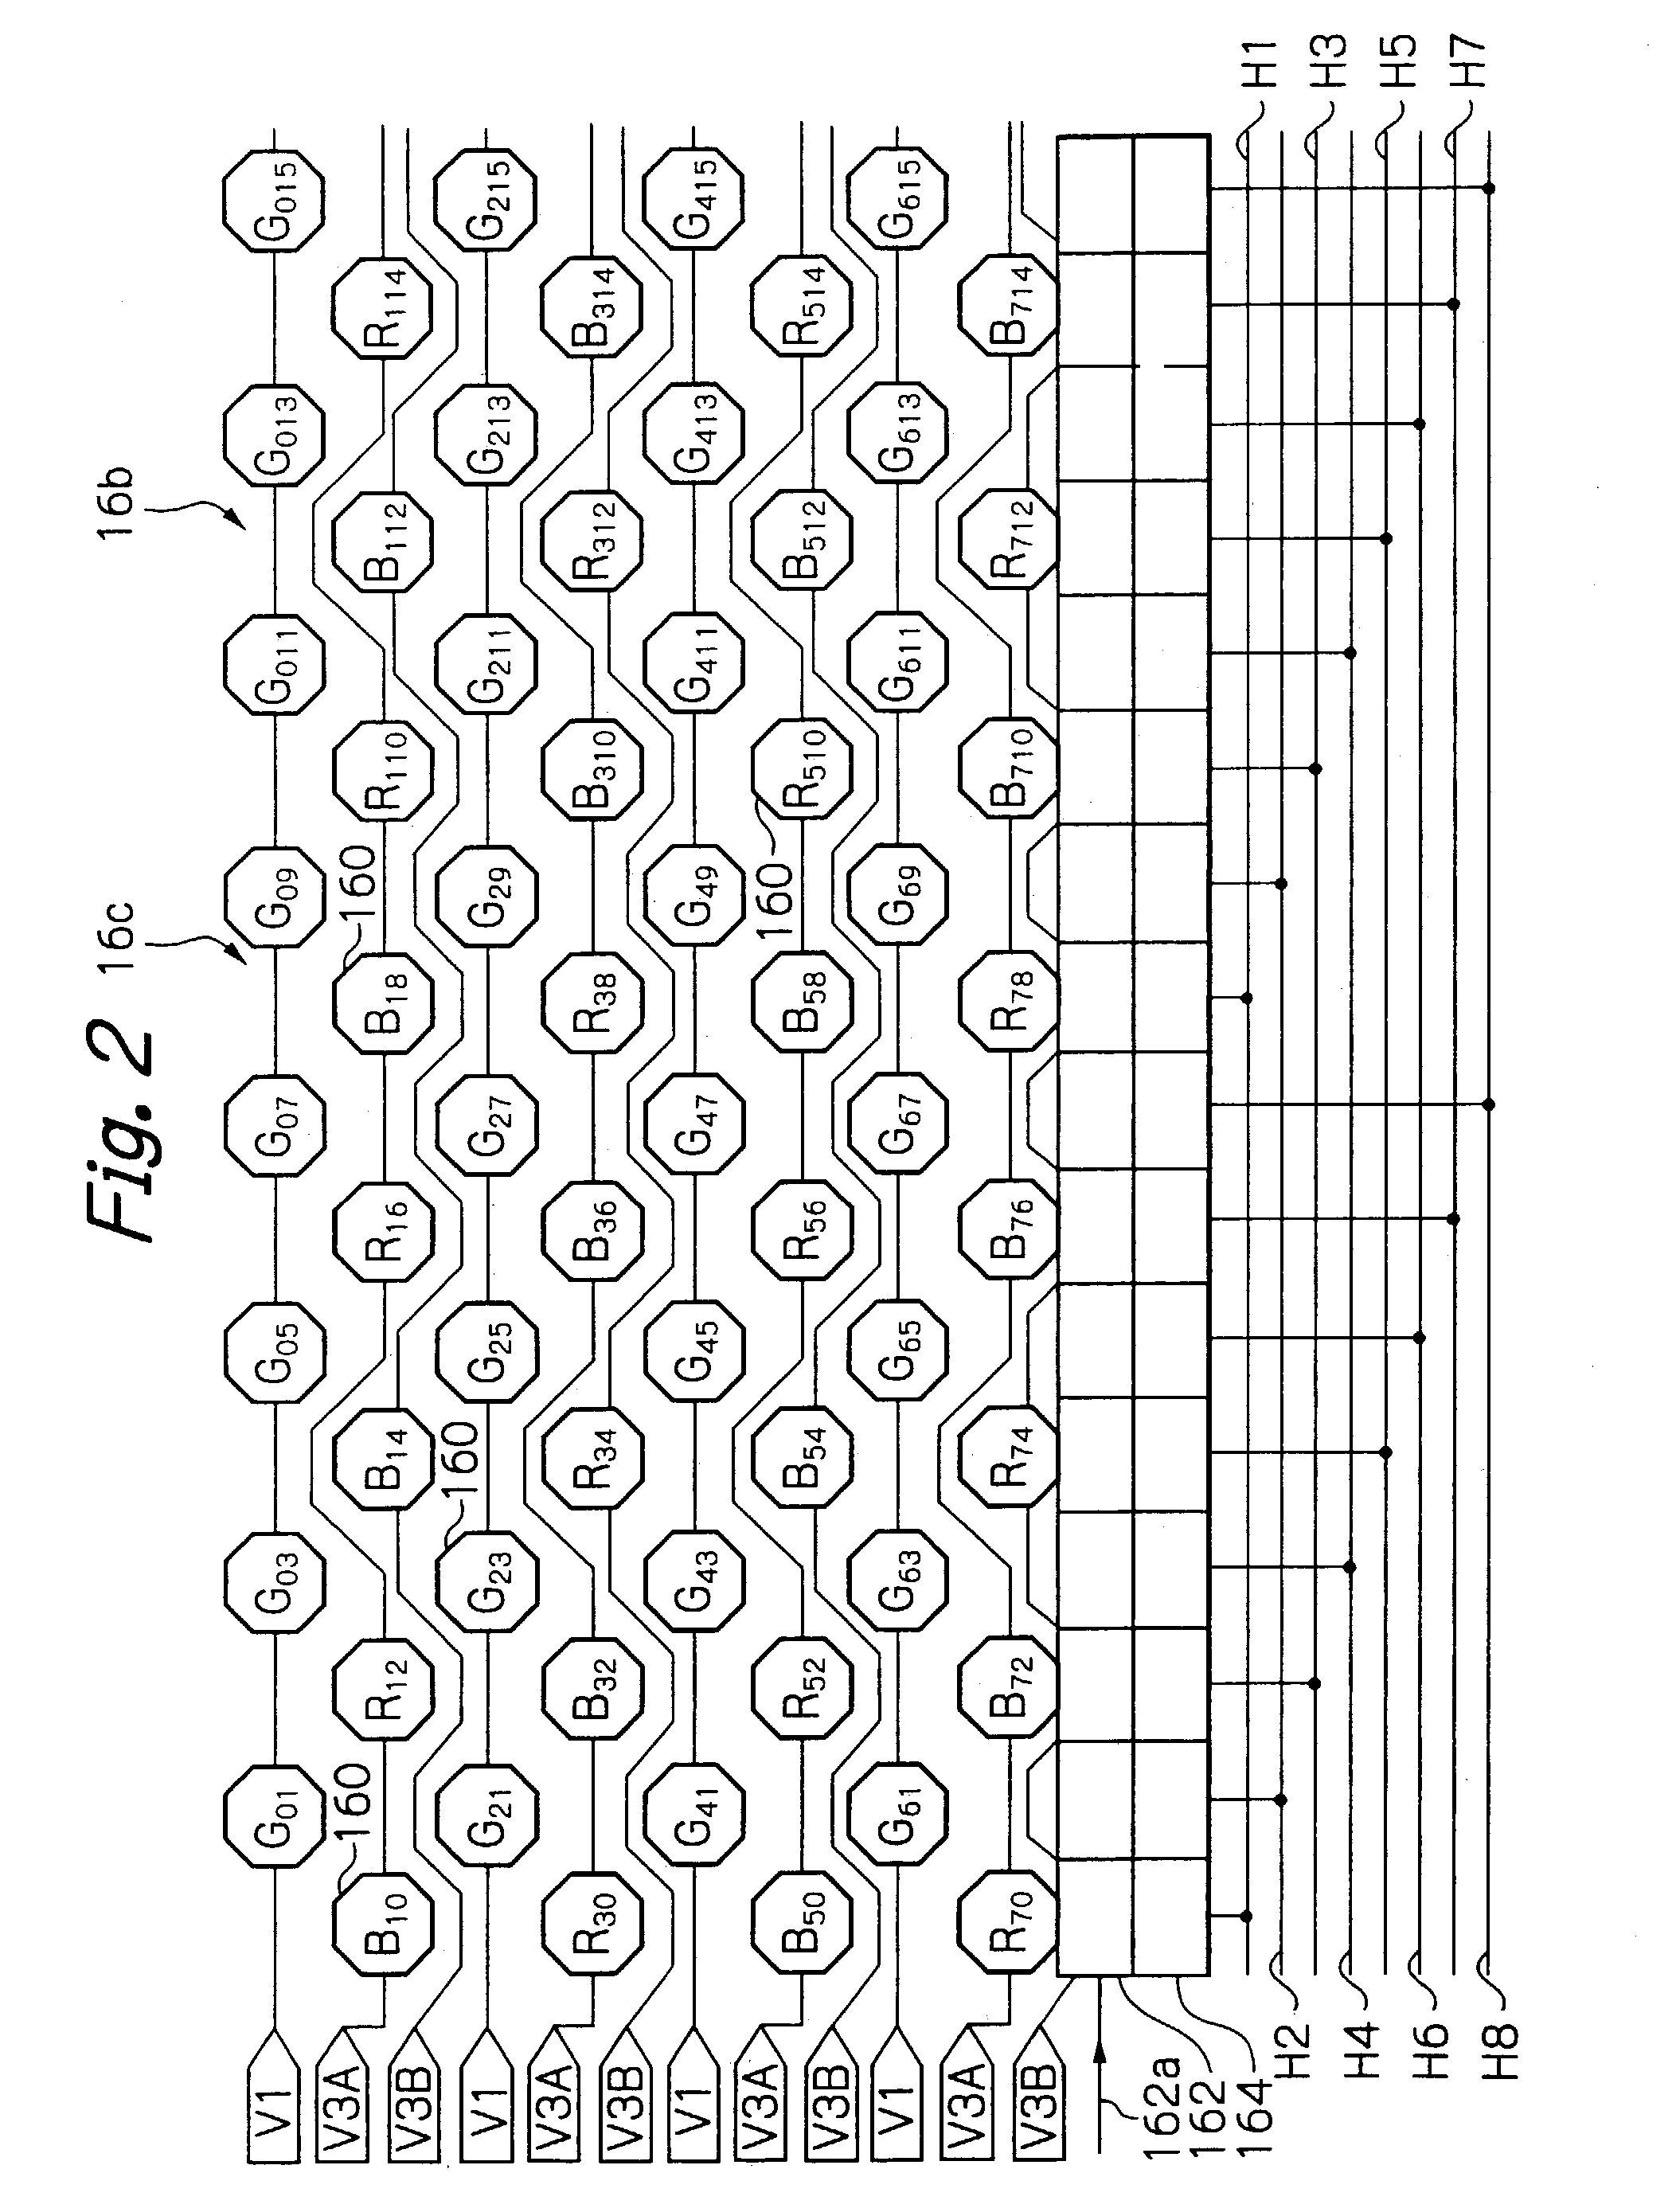 Solid-state image pickup apparatus with horizontal thinning and a signal reading method for the same